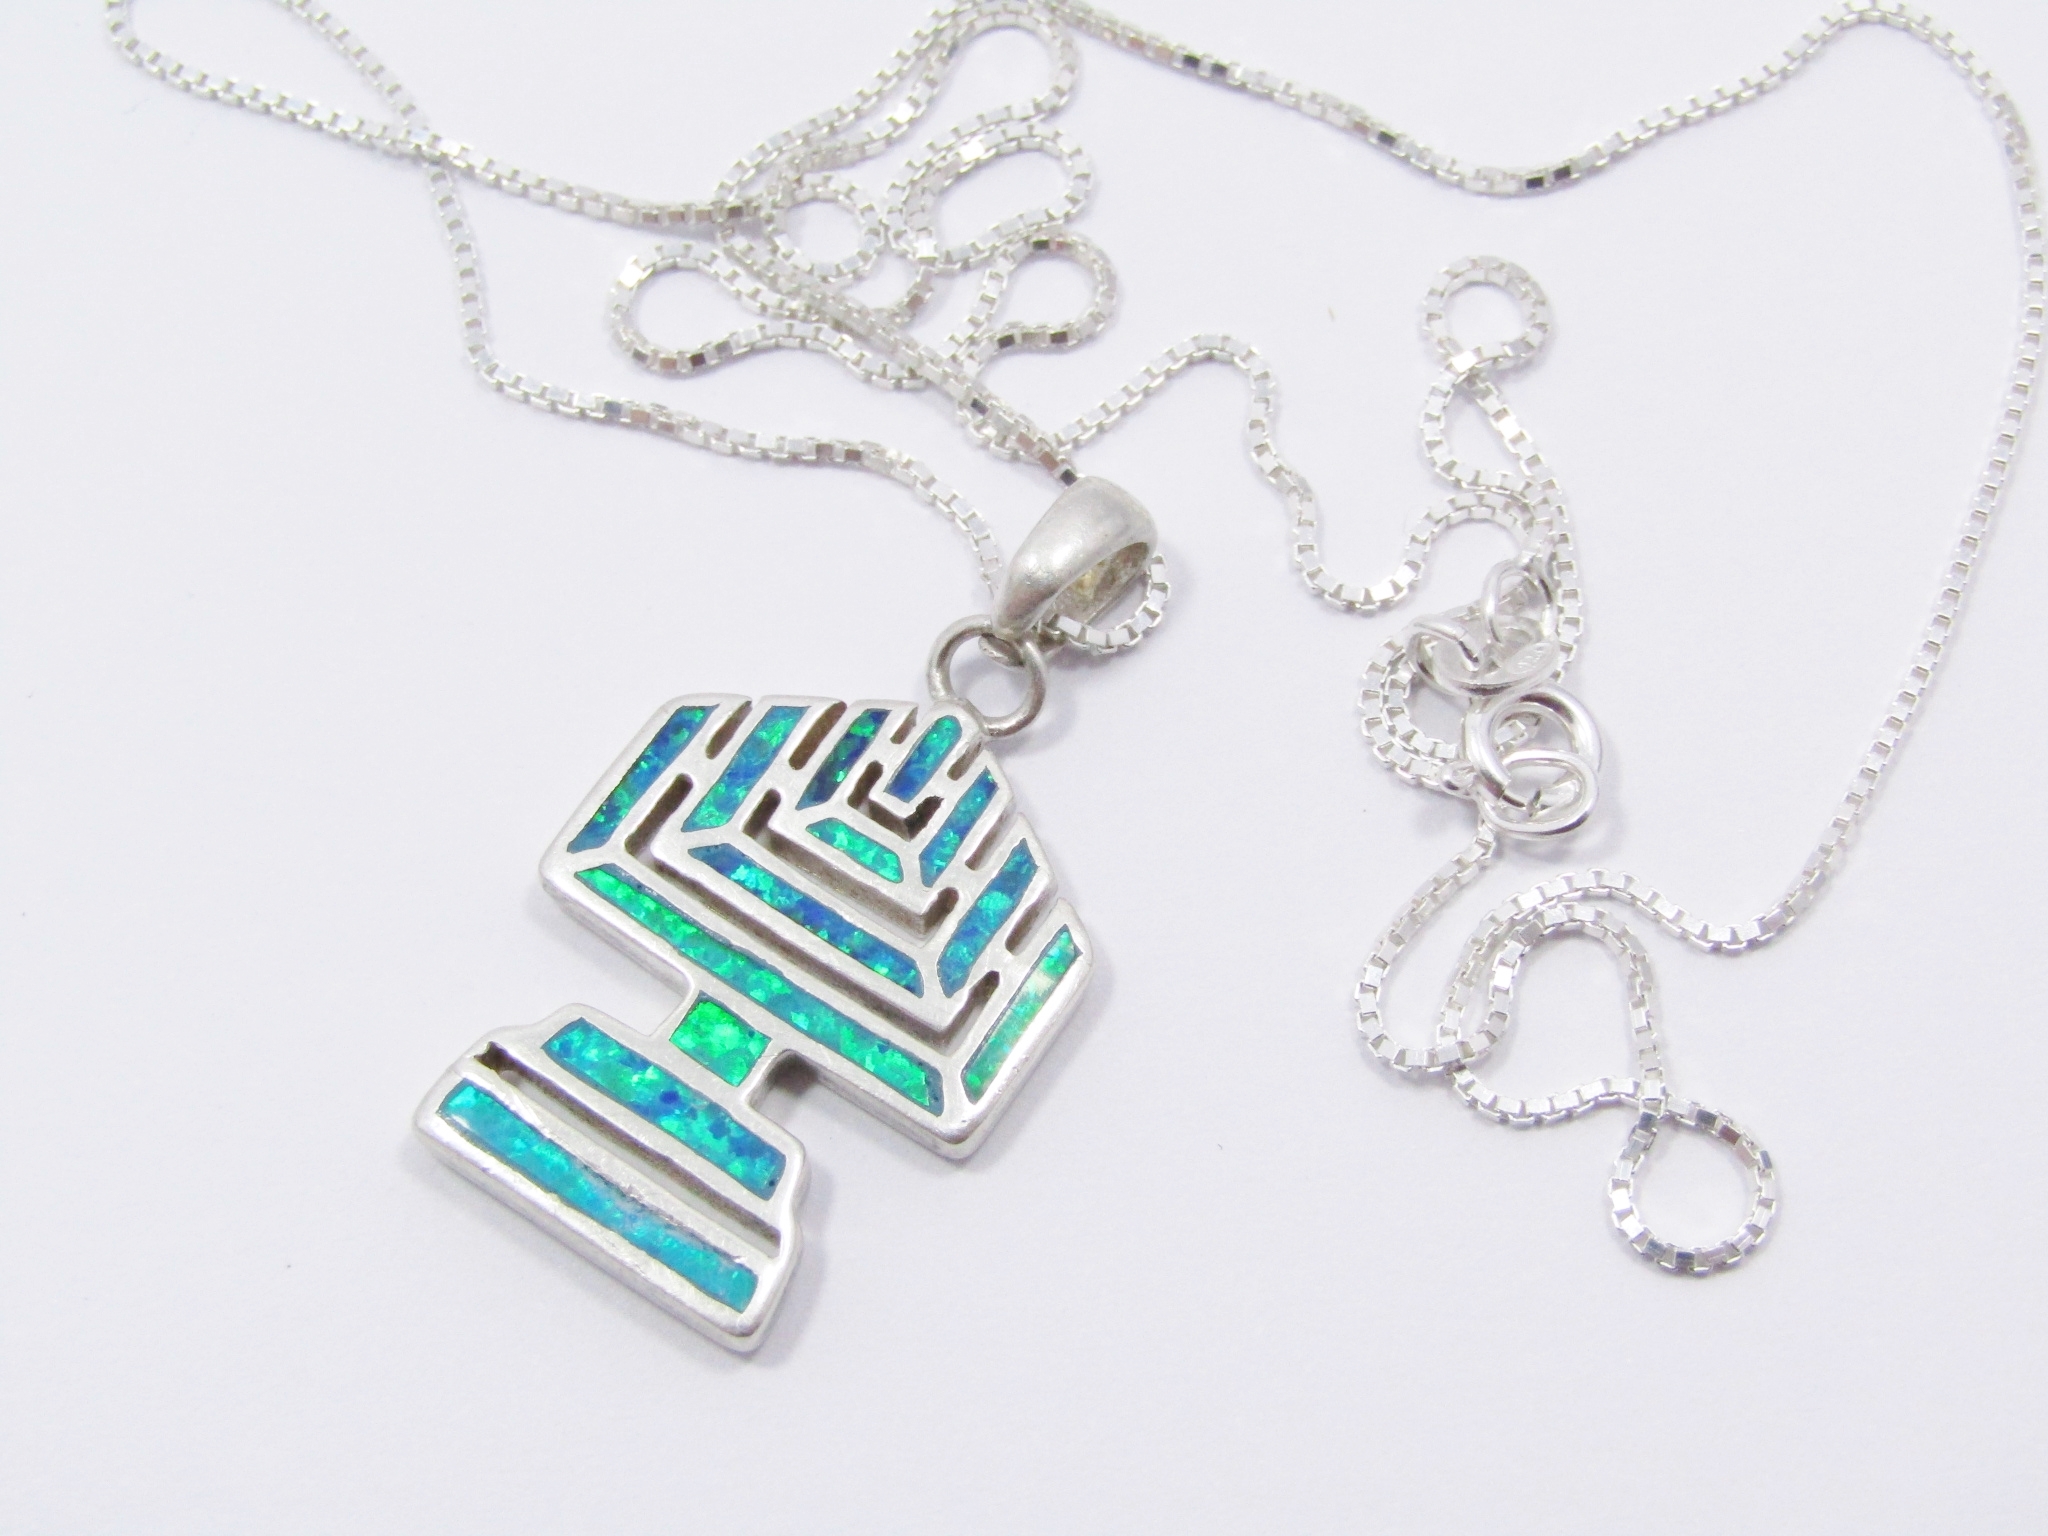 A Lovely Faux Opal Menorah Candle Pendant On Chain in Sterling Silver